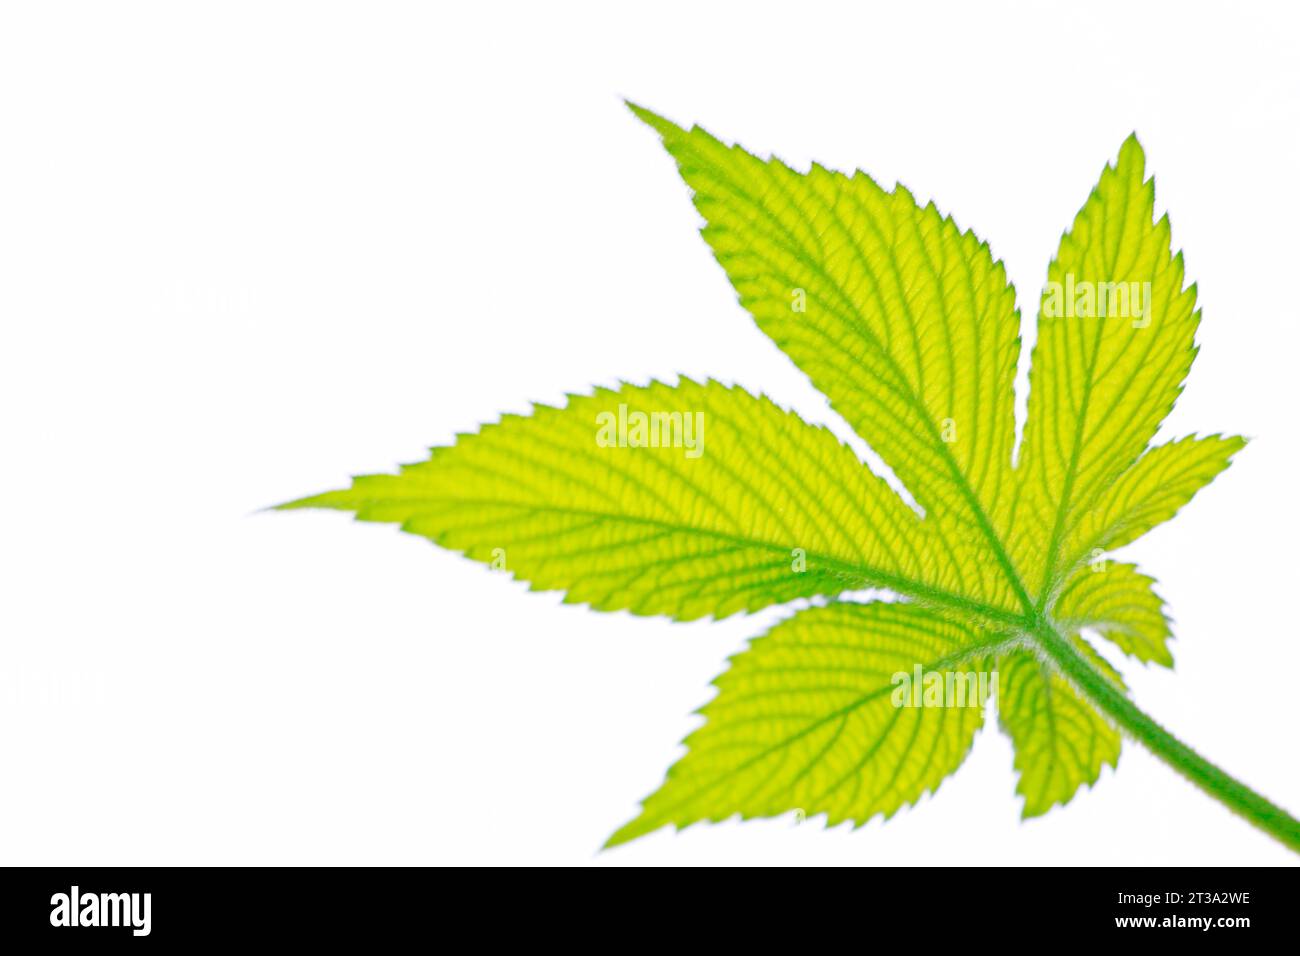 closeup of humulus scandens leaf on a white background Stock Photo